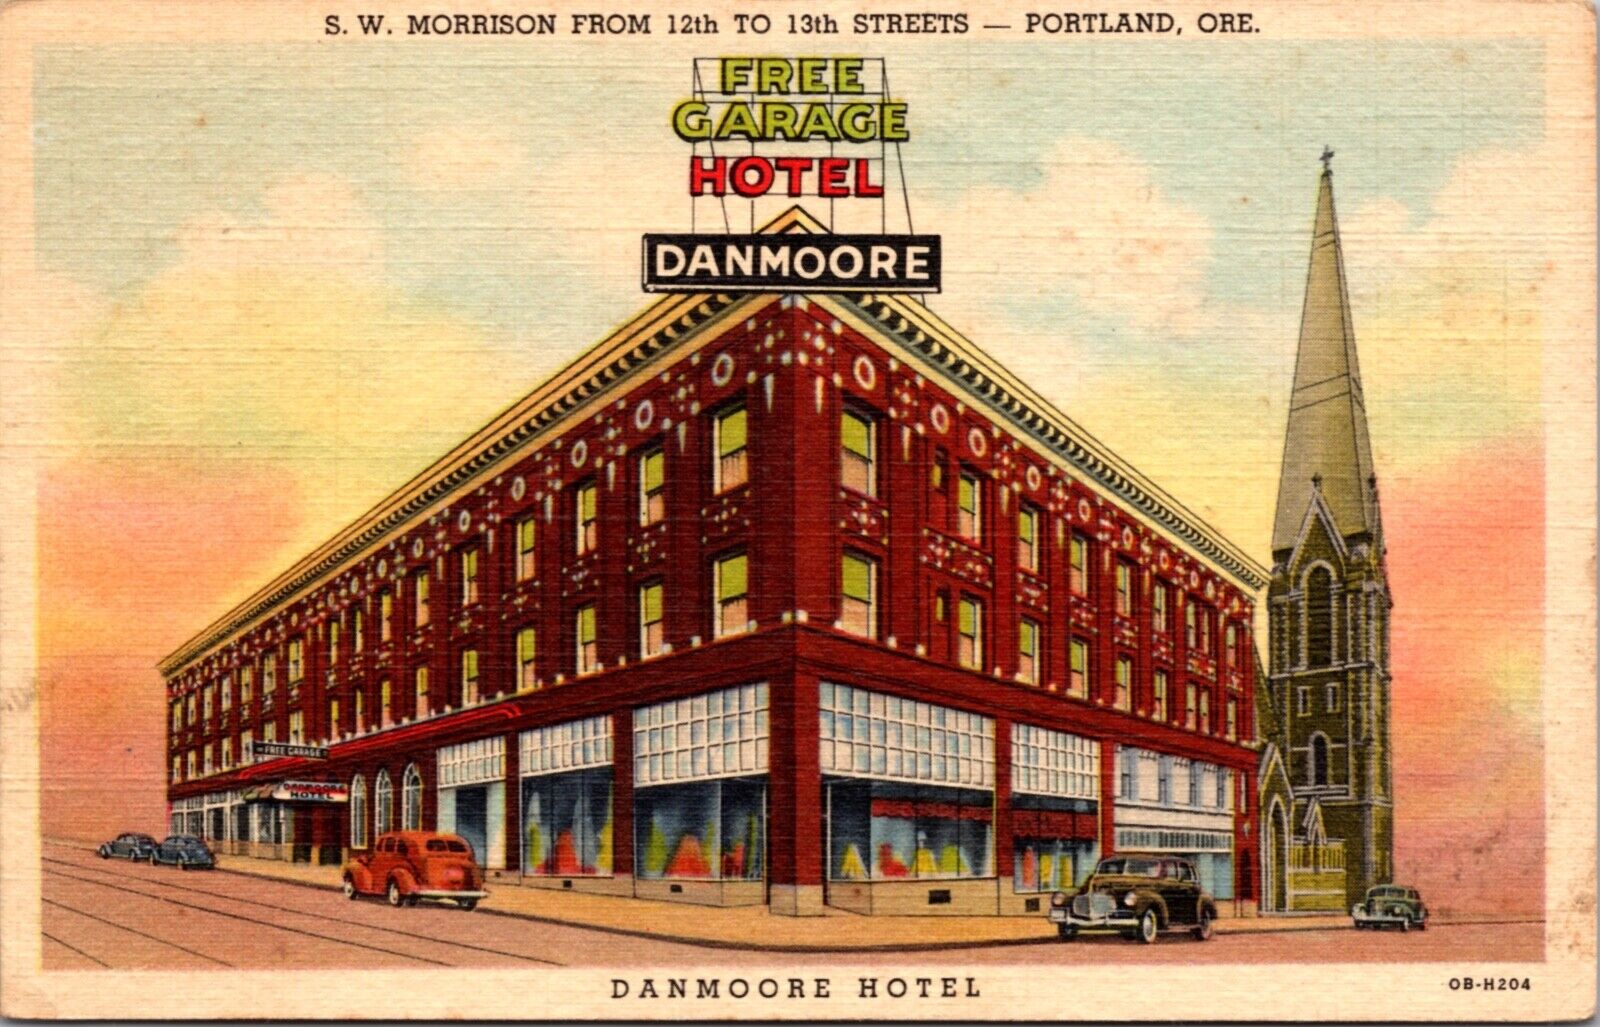 Linen PC Danmoore Hotel S.W. Morrison From 12th to 13th Streets Portland Oregon